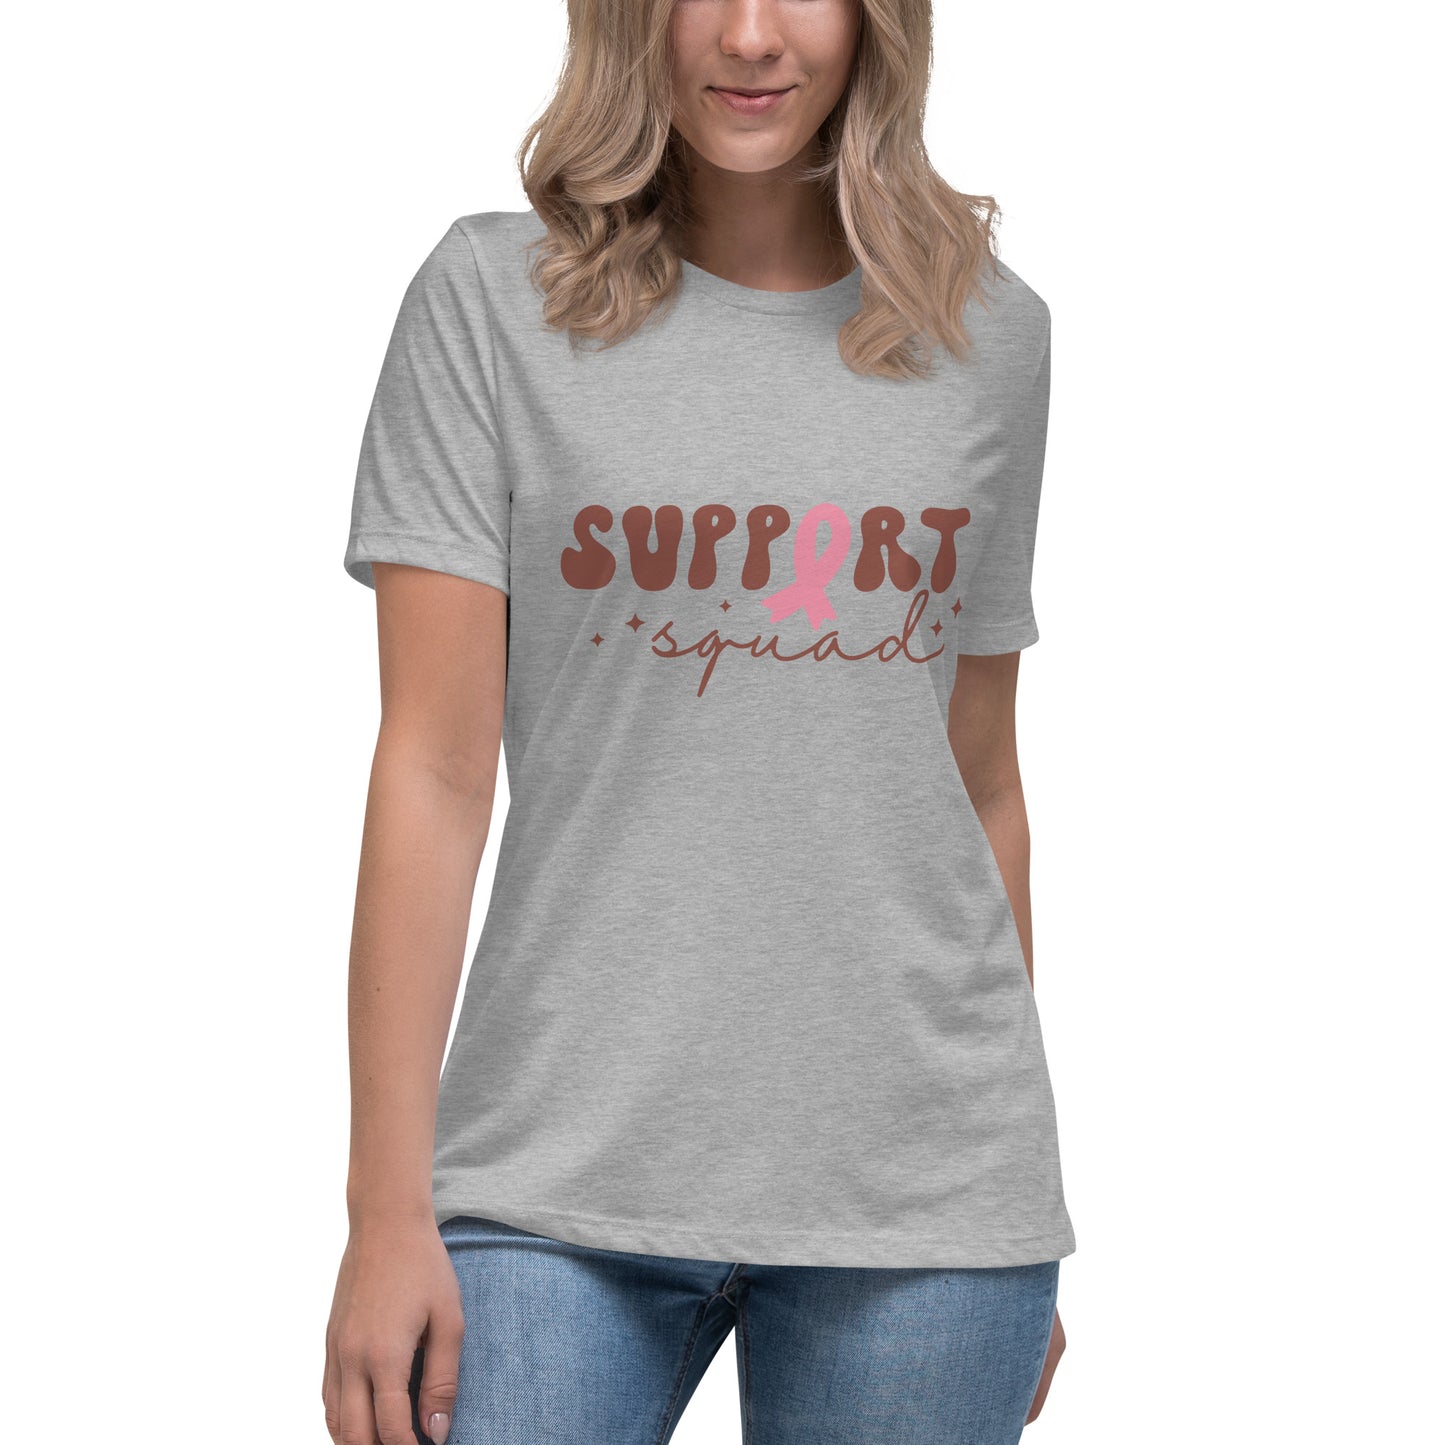 Support Squad Breast Cancer Awareness Women's Relaxed T-Shirt Tee Tshirt